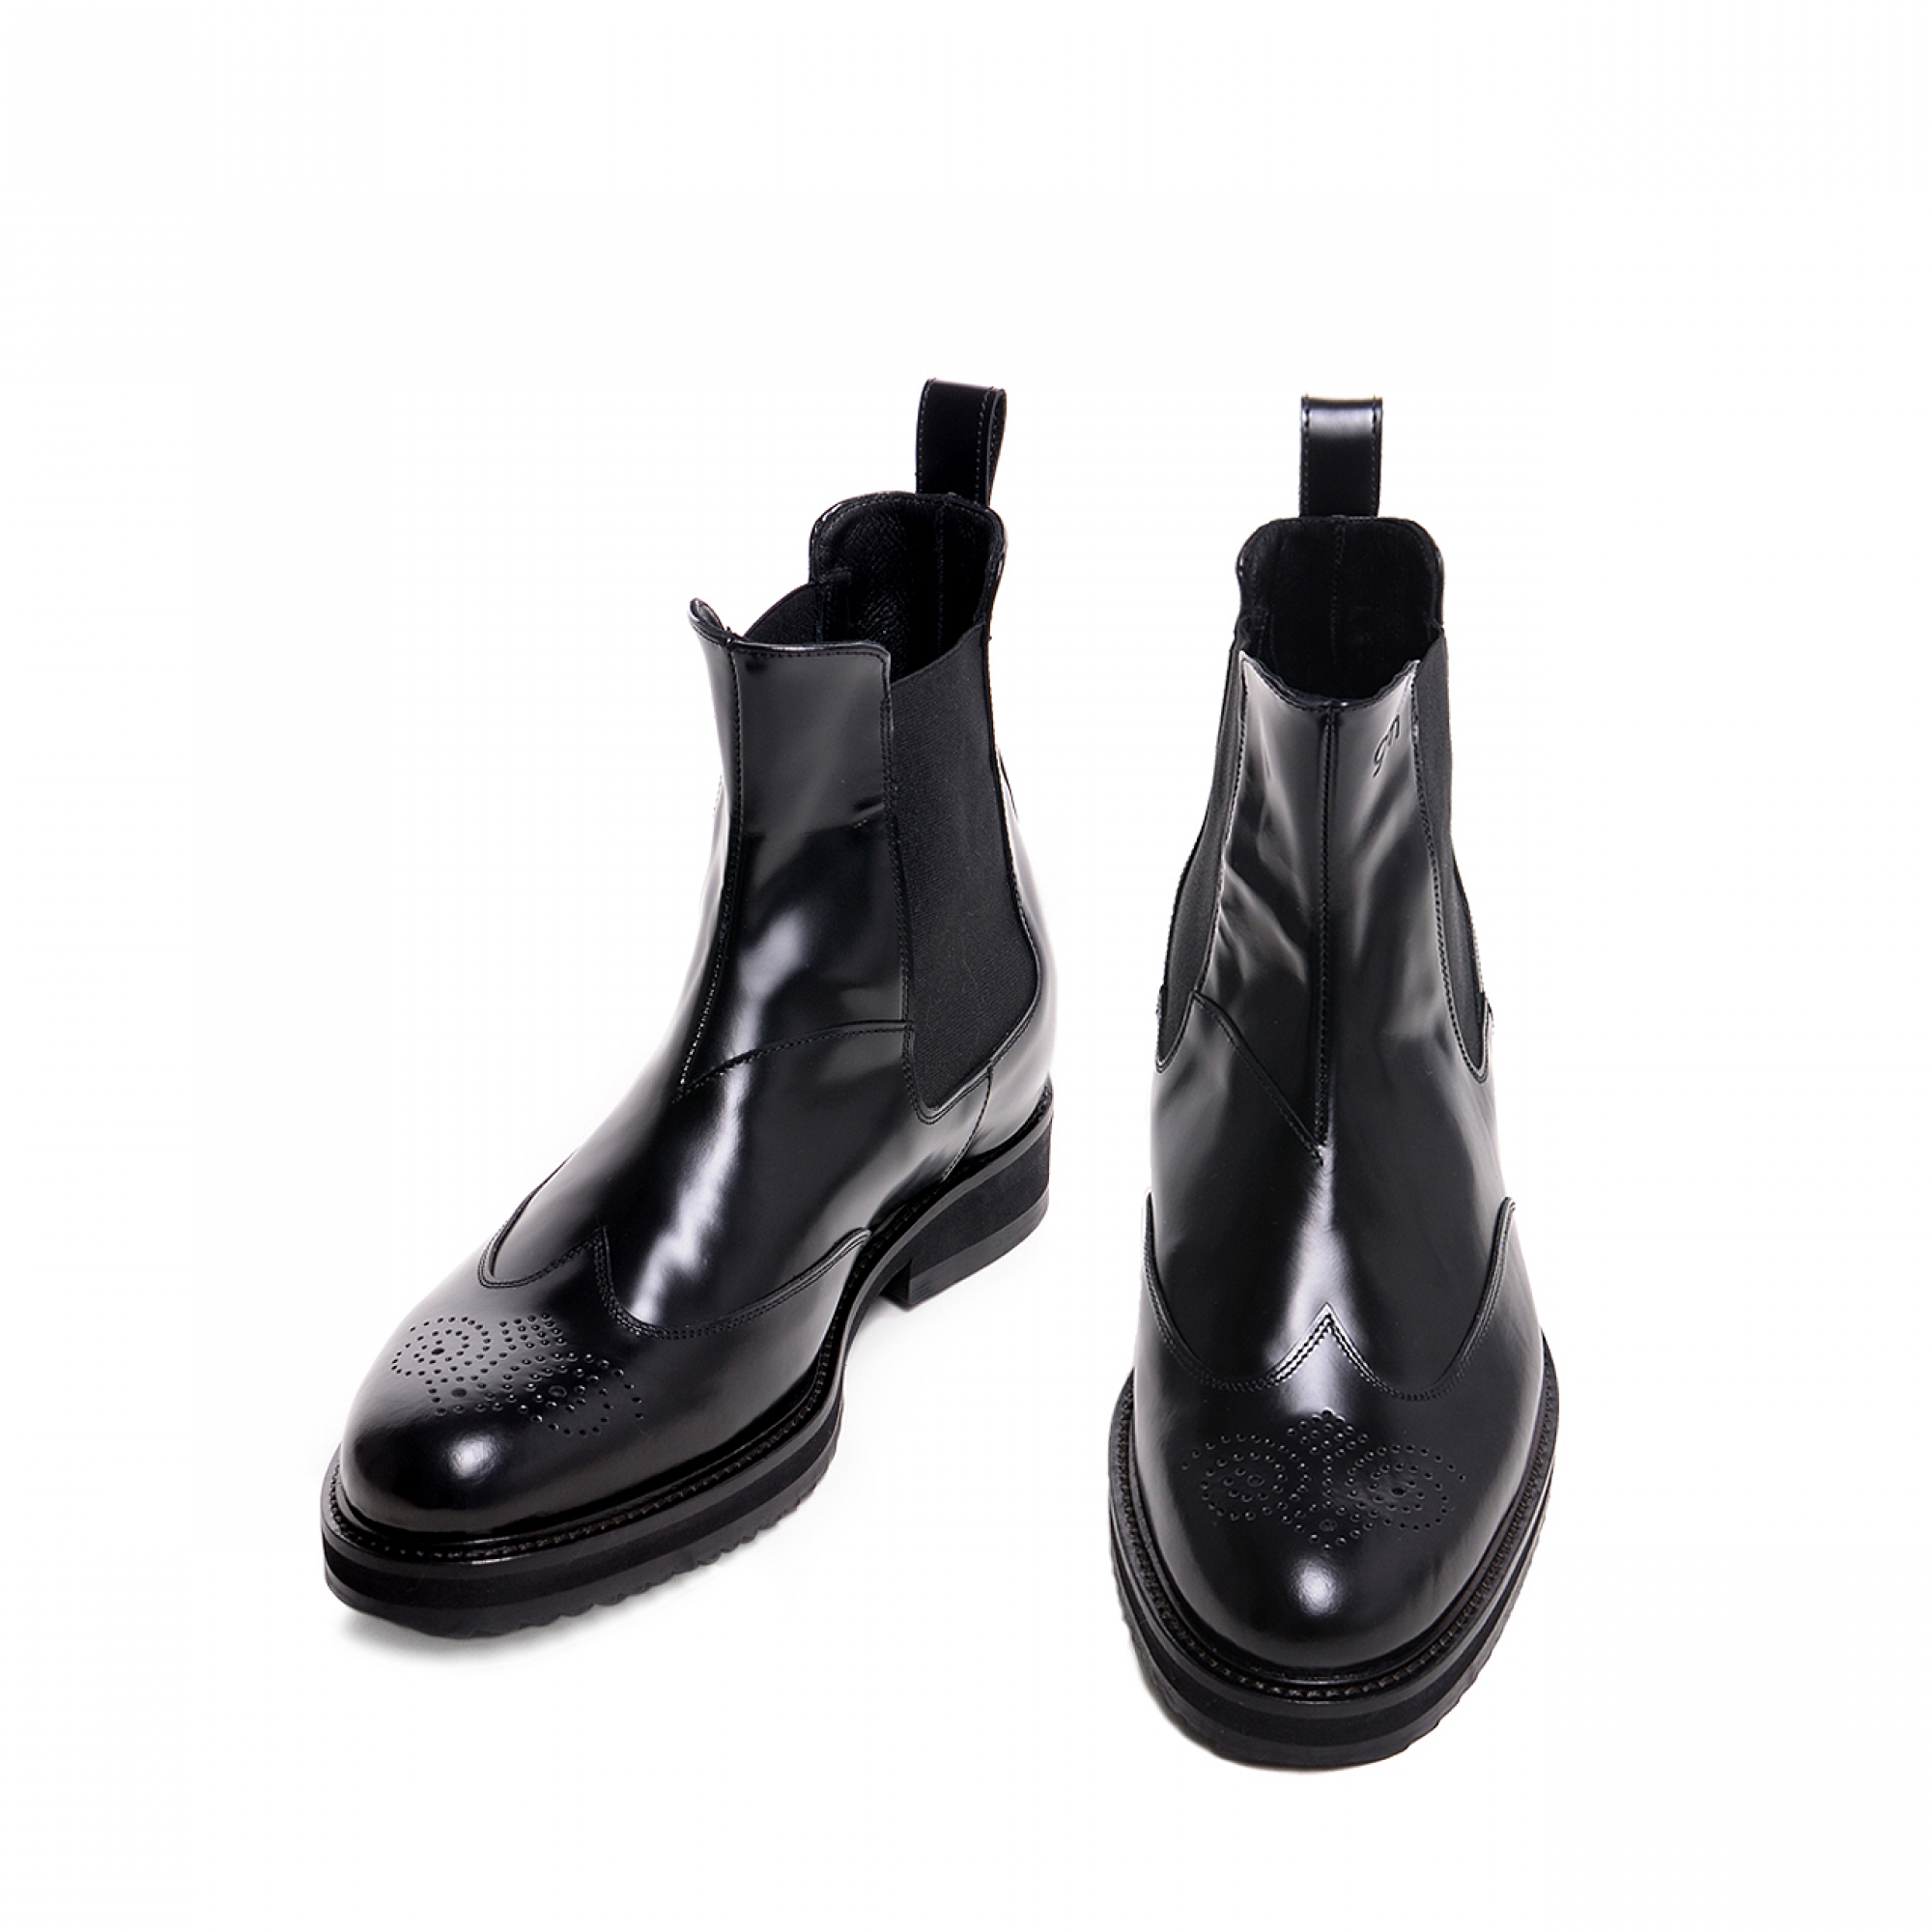 Gae Aulenti Boots in Brushed Leather from 2.4 to 4 inches